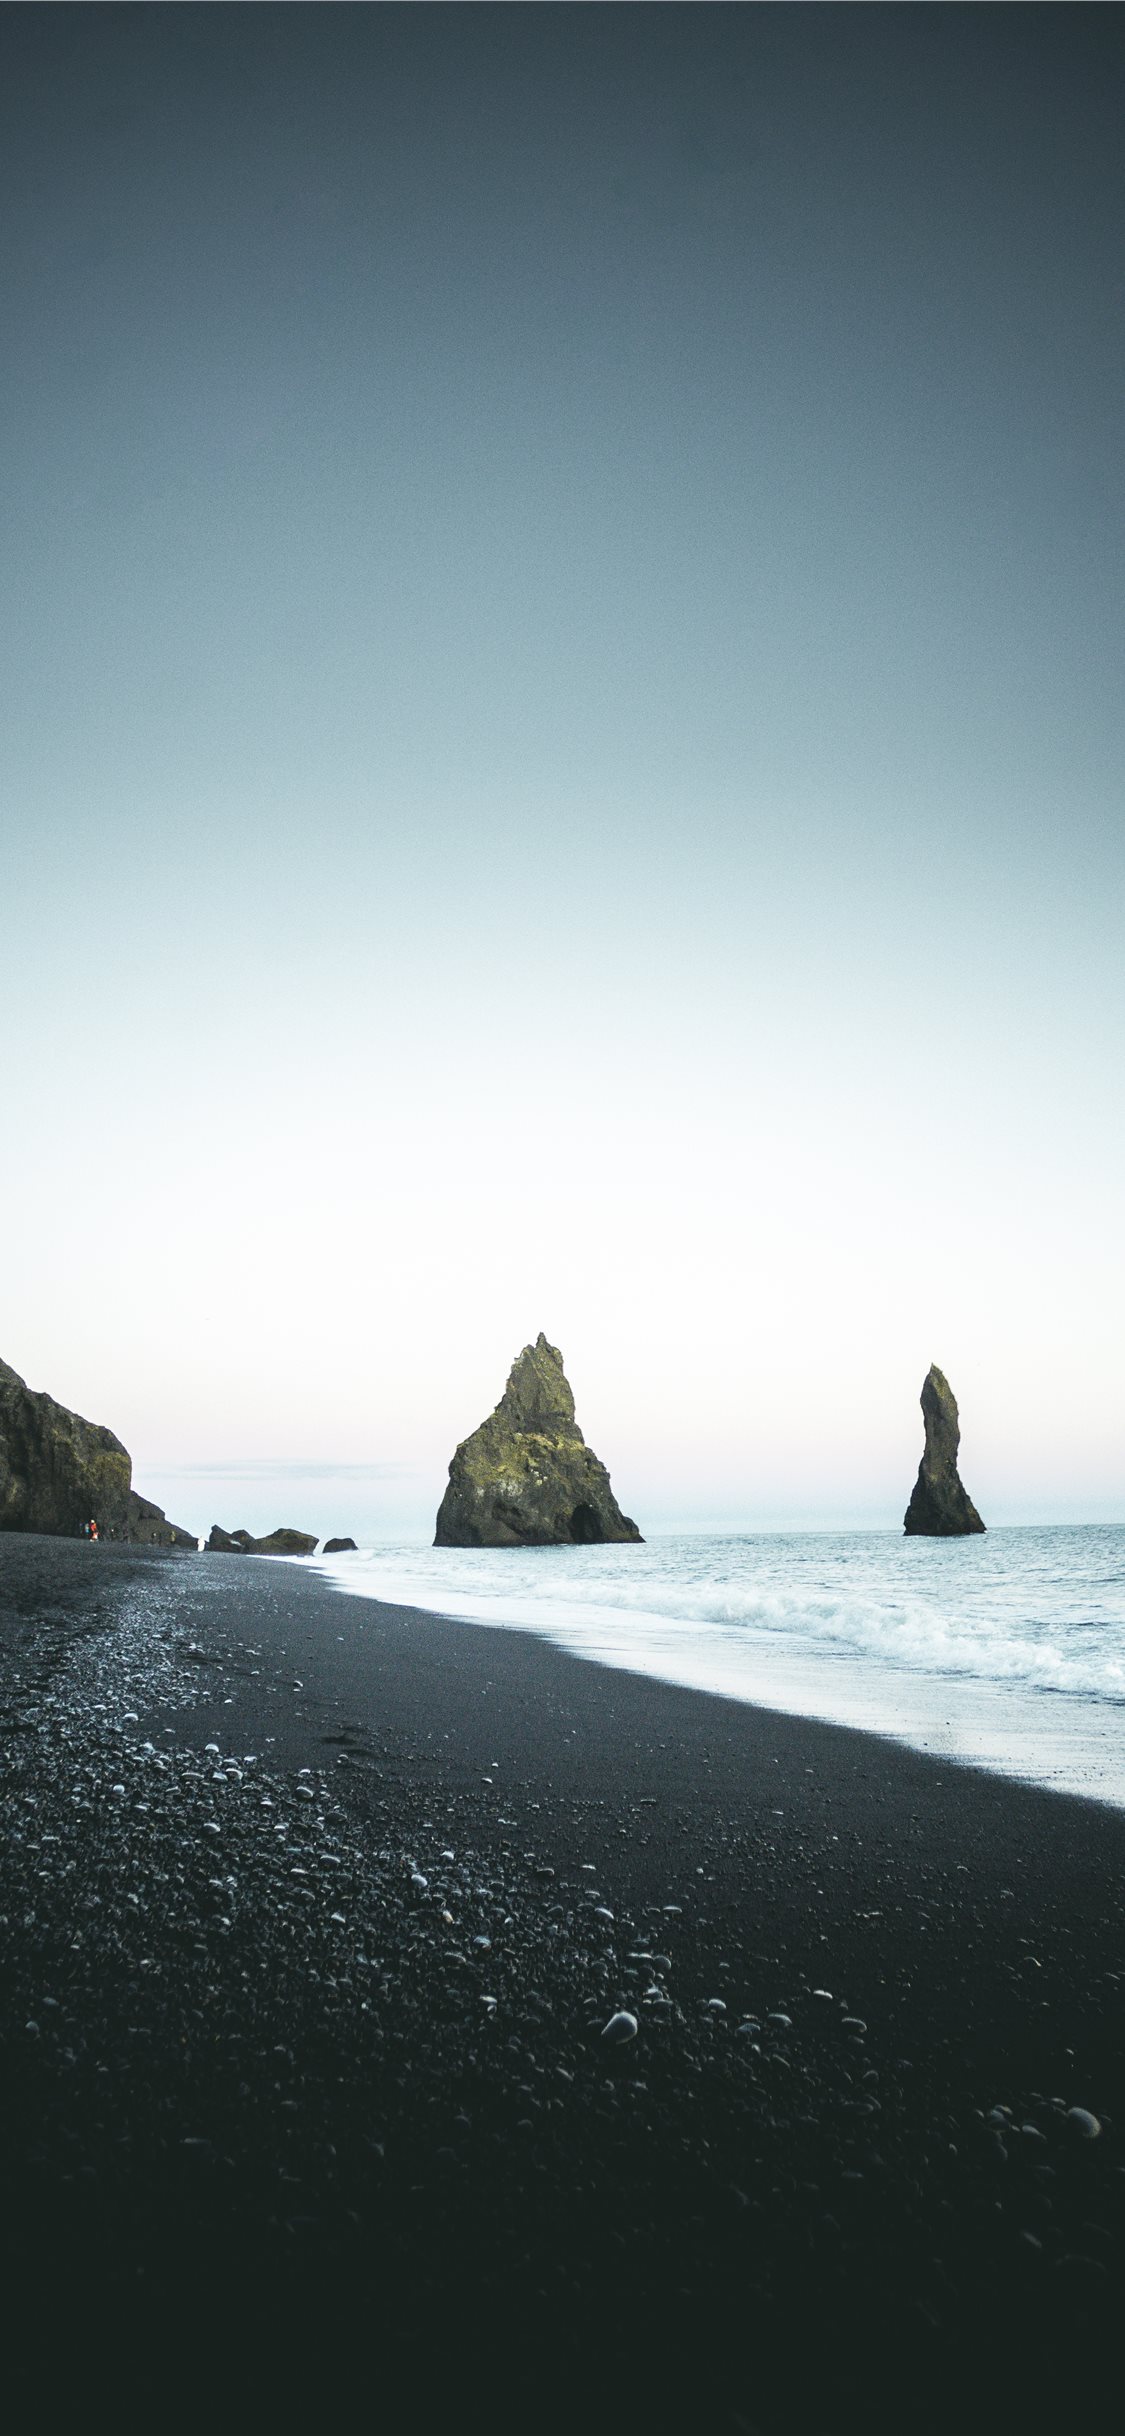 Landscapes Of Iceland IPhone Wallpaper  IPhone Wallpapers  iPhone  Wallpapers